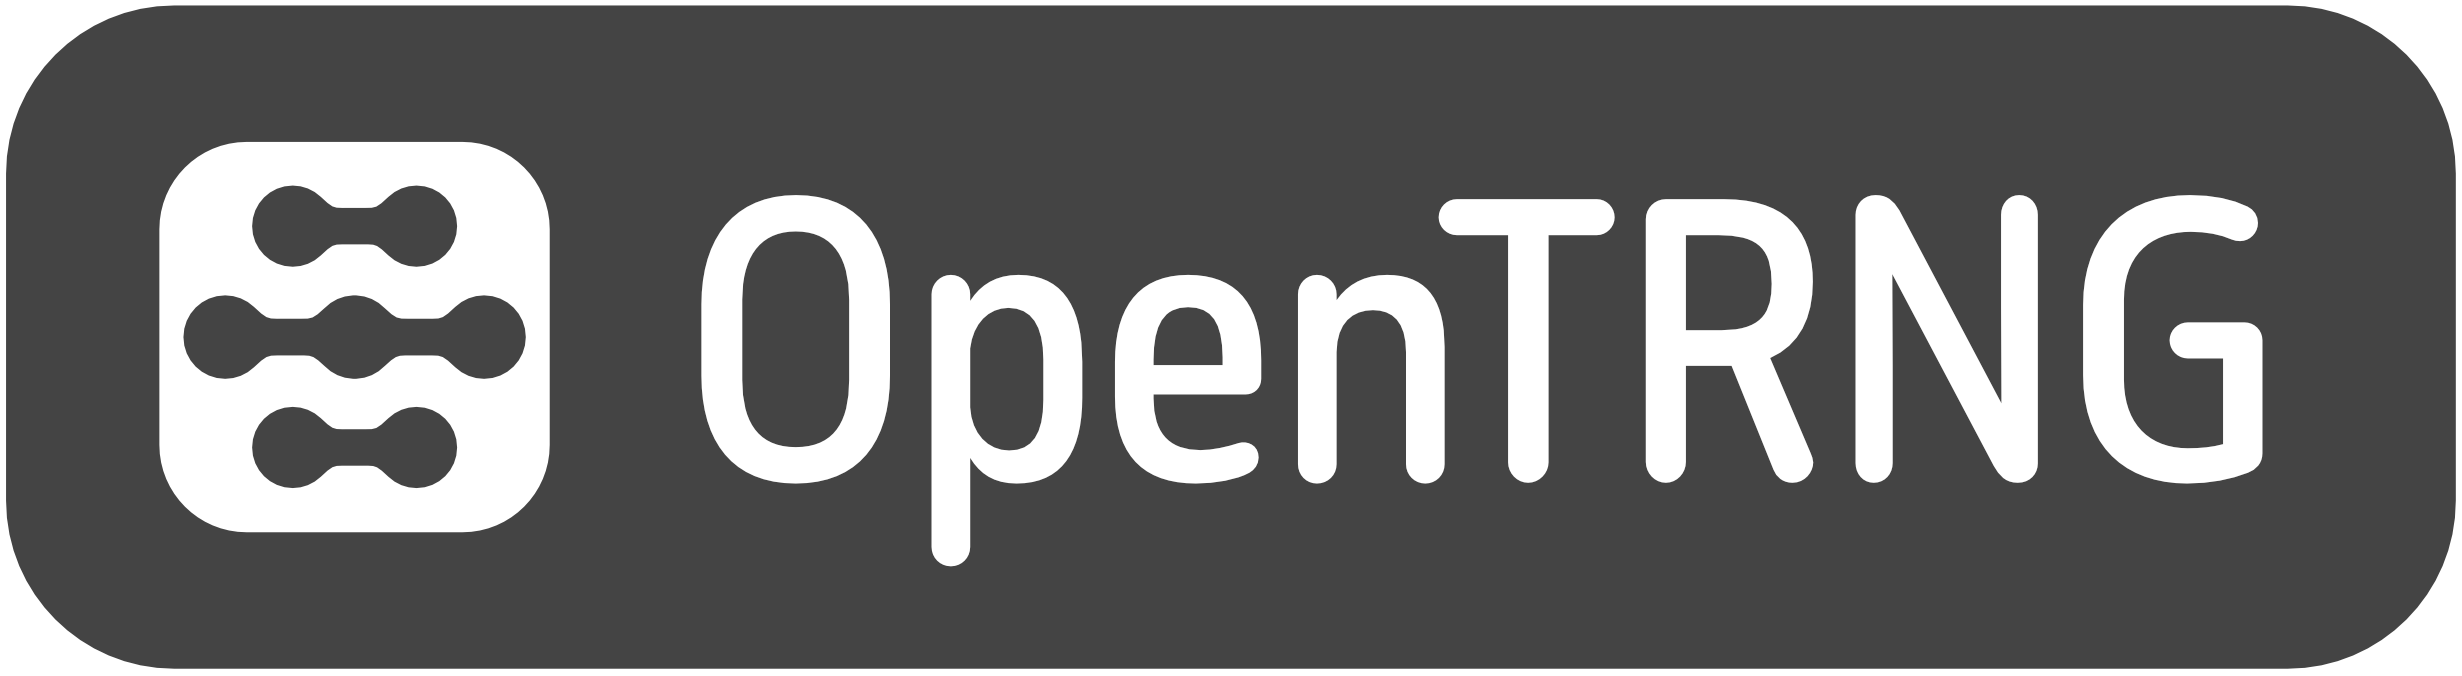 OpenTRNG